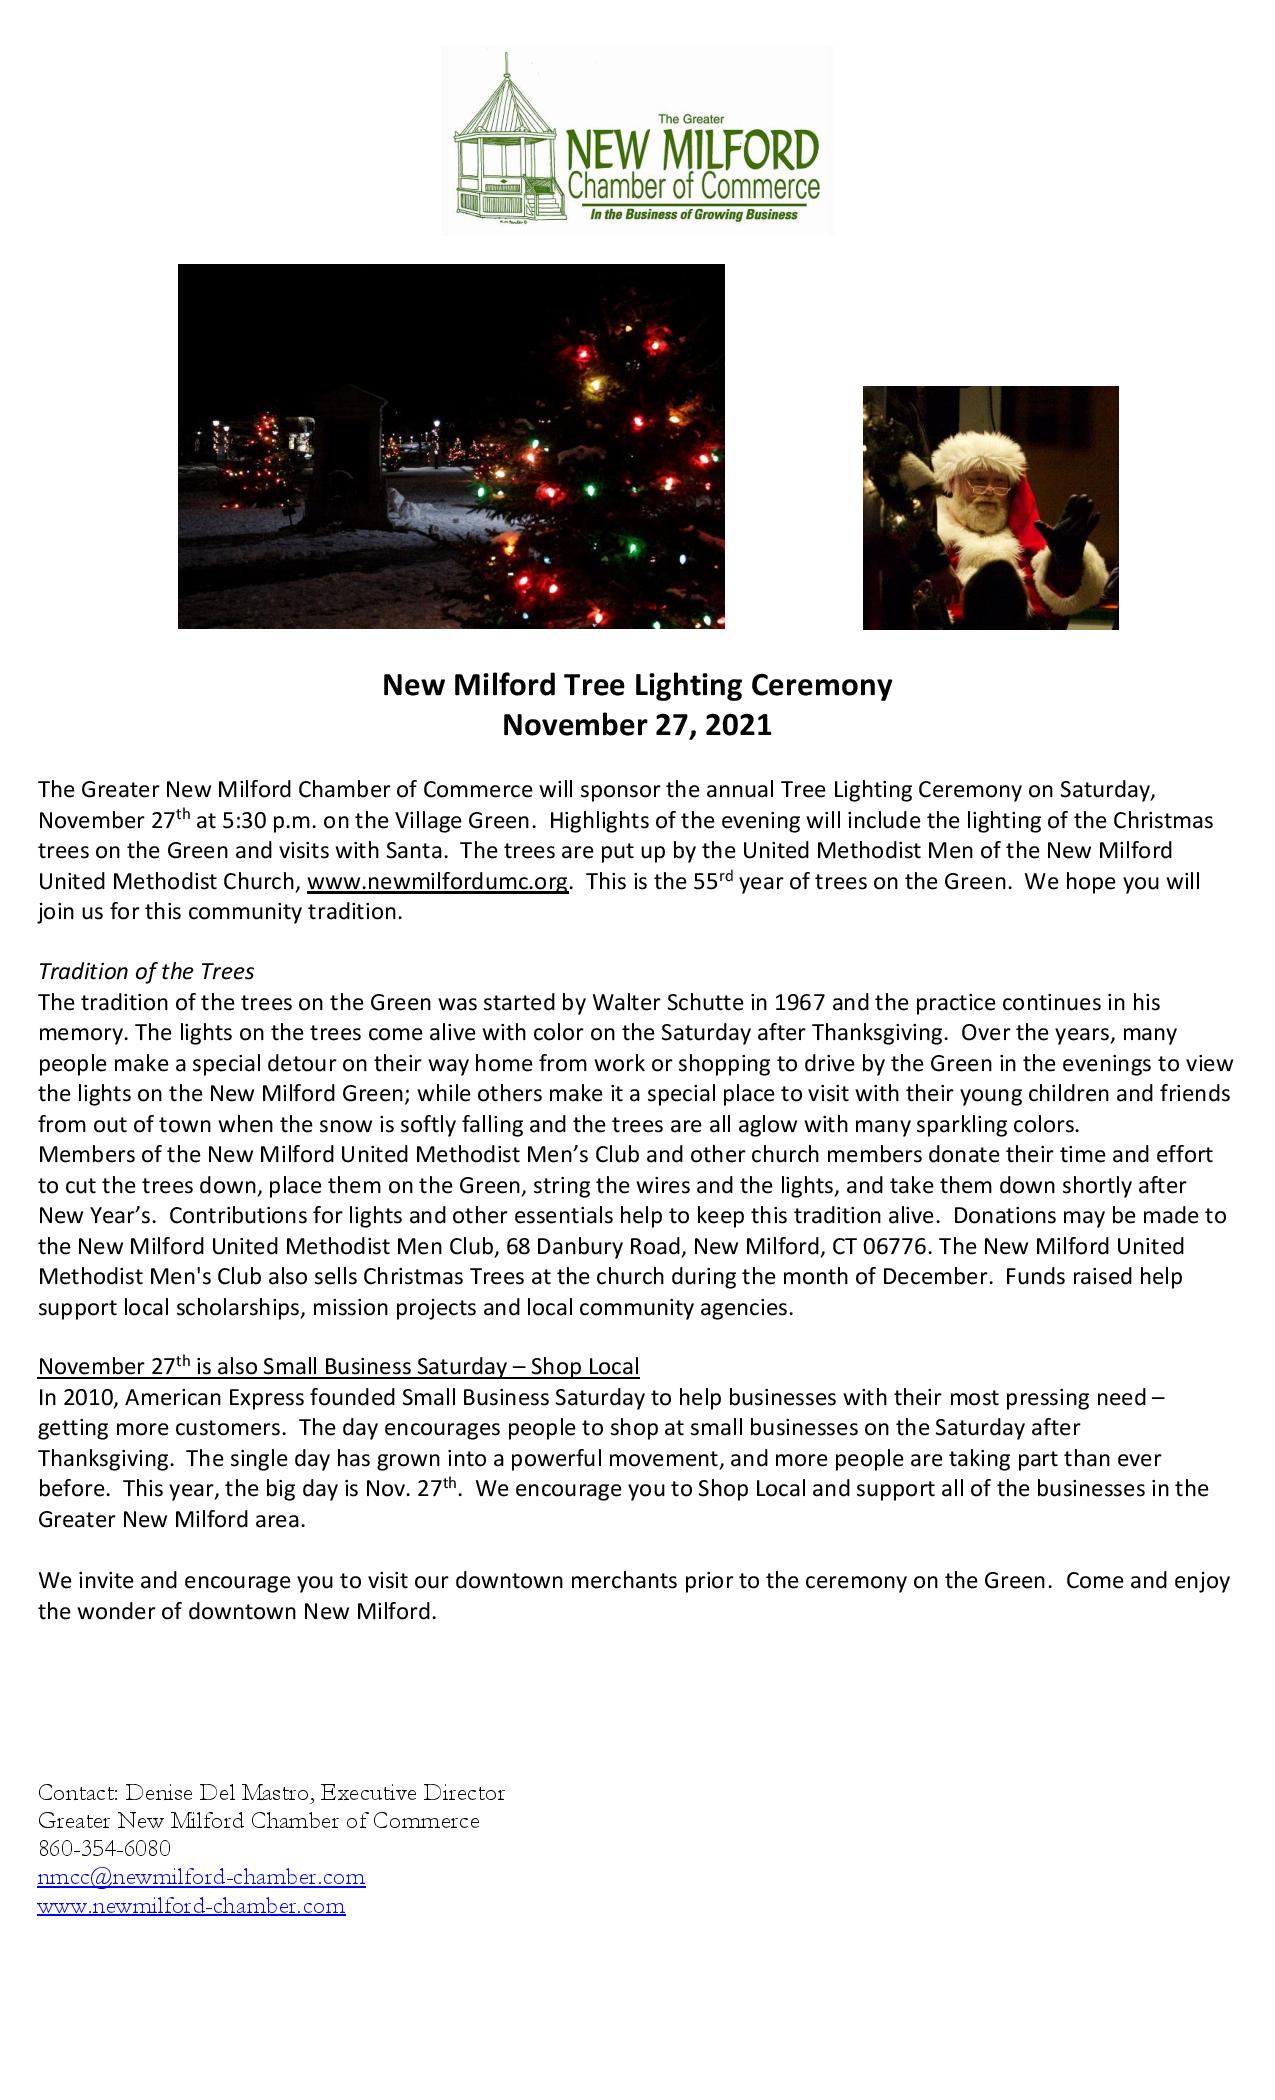 New Milford Tree Lighting Ceremony New Milford Chamber of Commerce